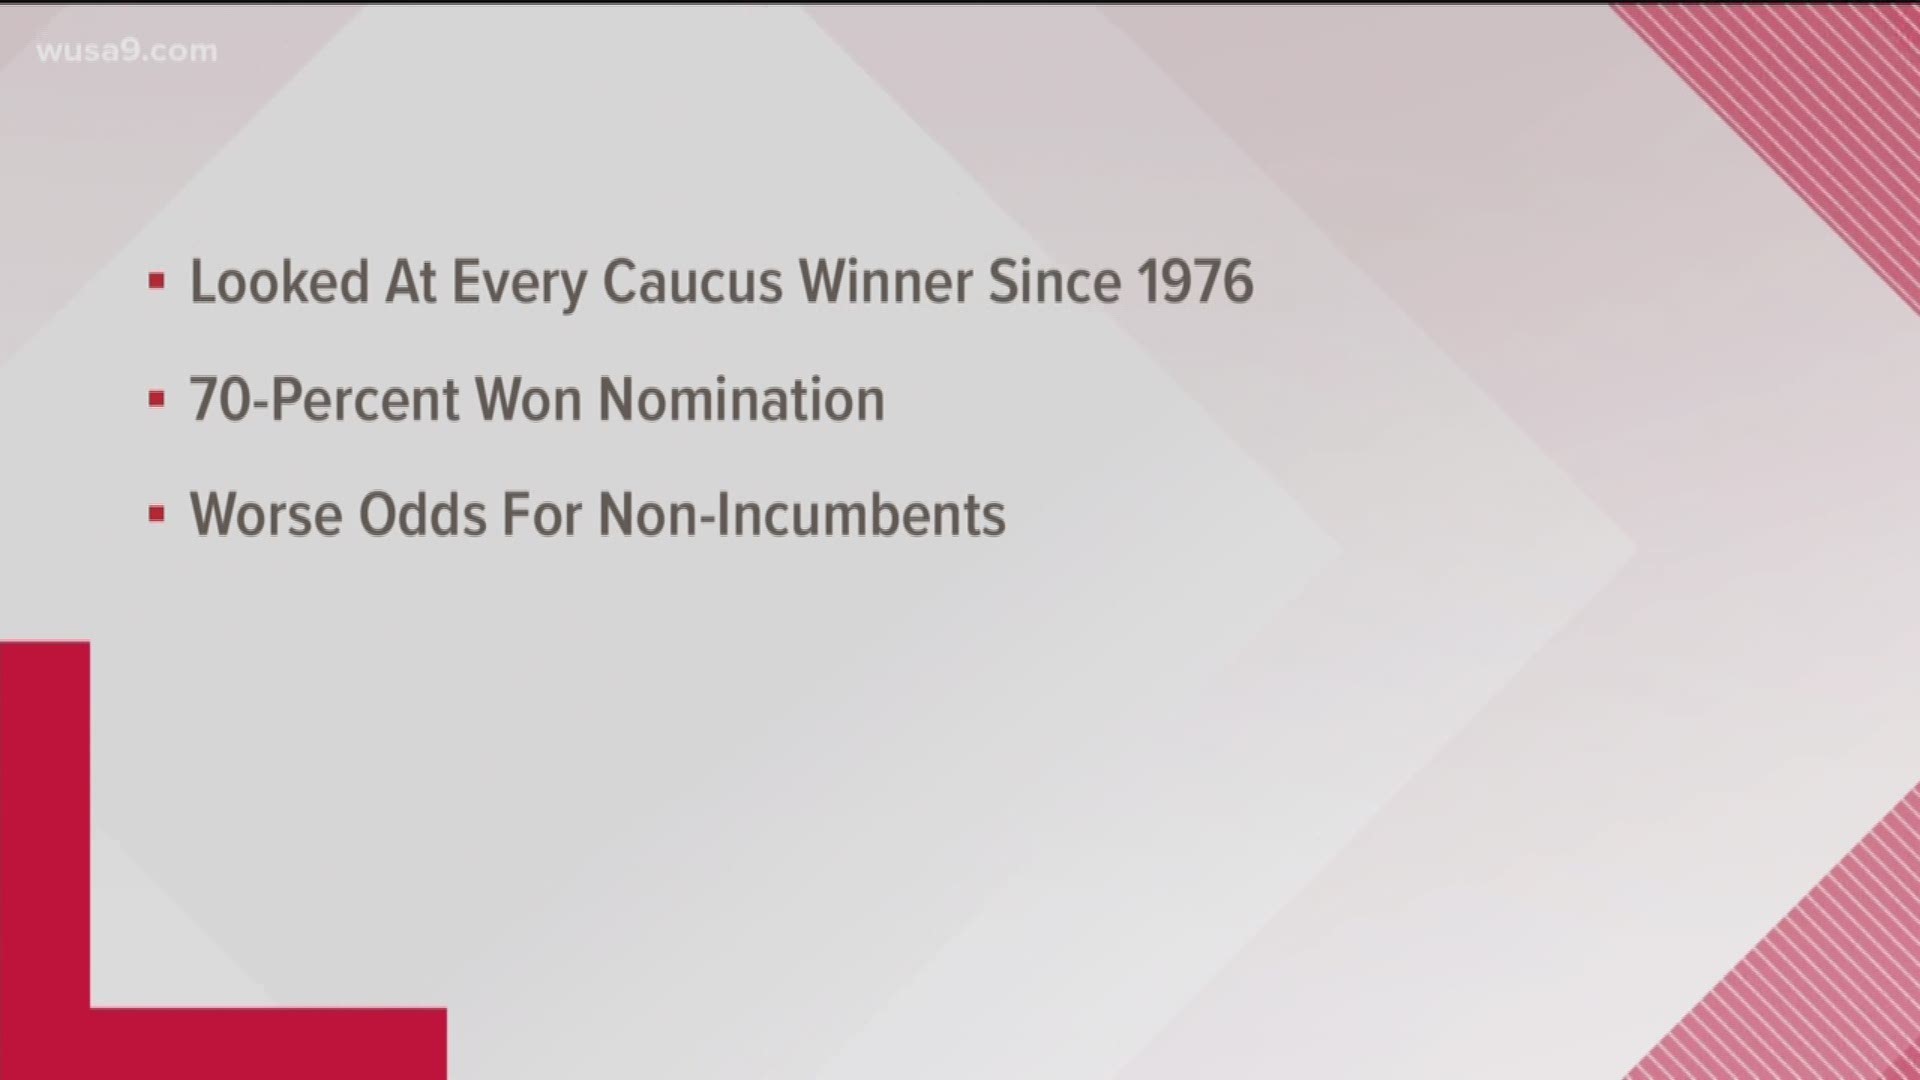 Our Verify team looked at every caucus winner since 1976 and 70% of those winners went on to win the nomination.